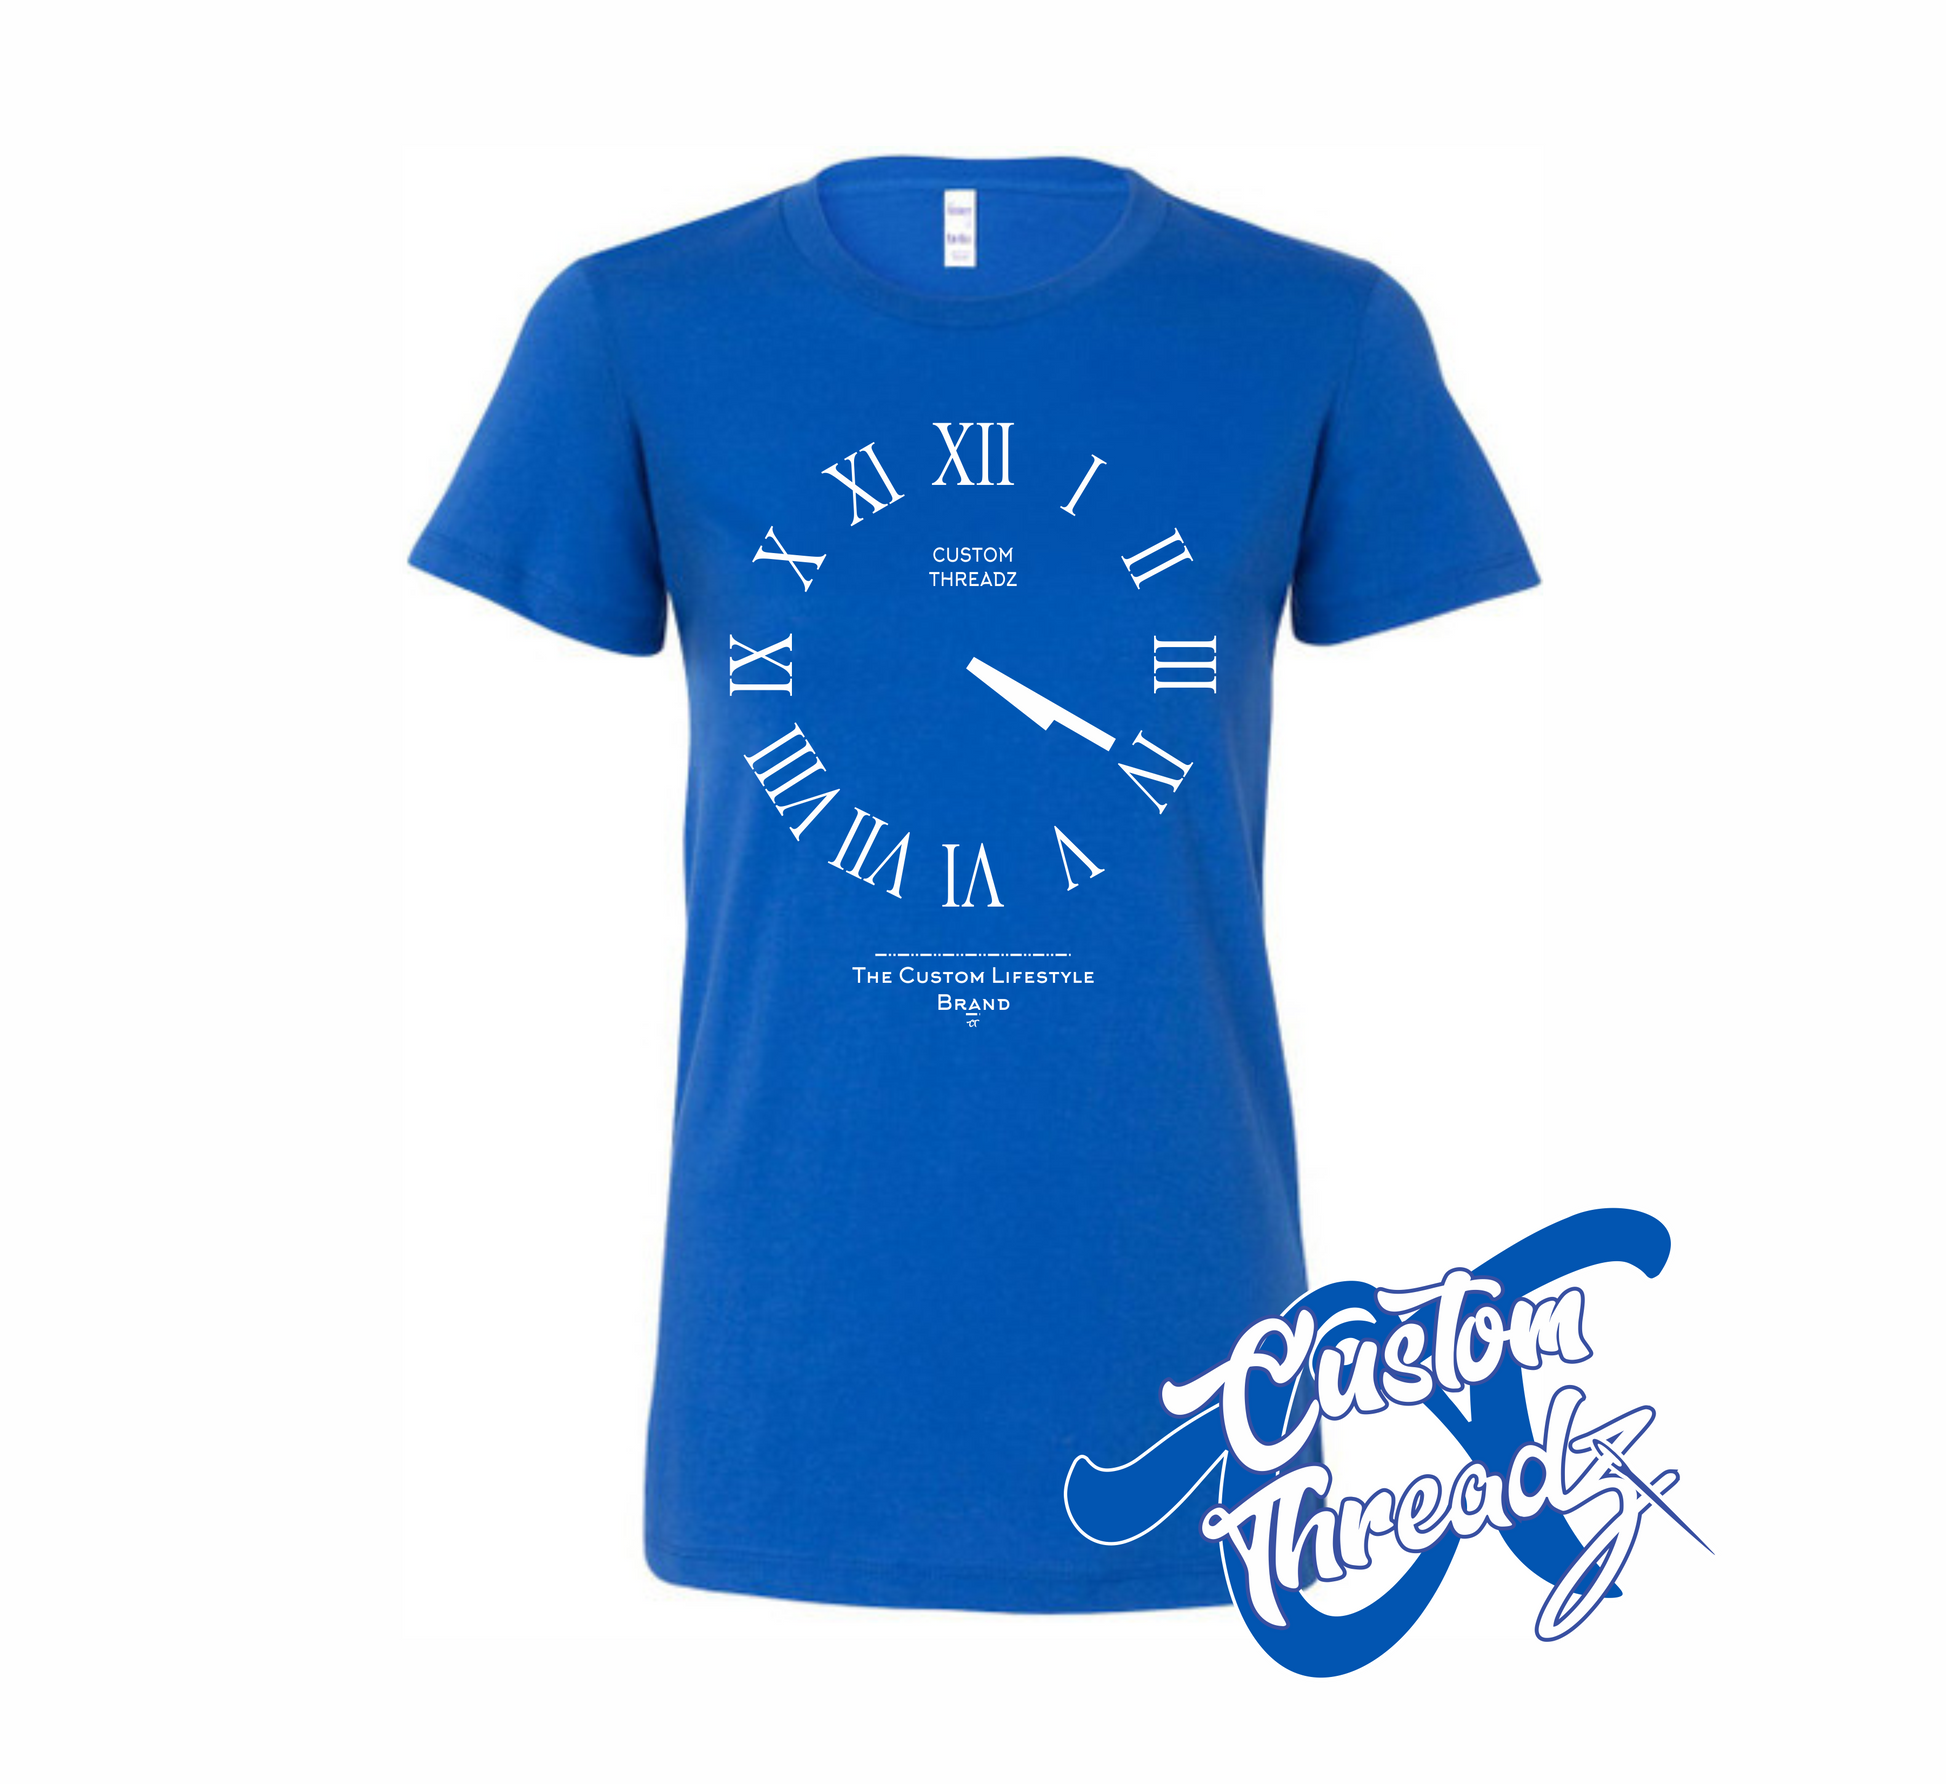 royal blue womens tee with roman analog clock set to 4 20 DTG printed design